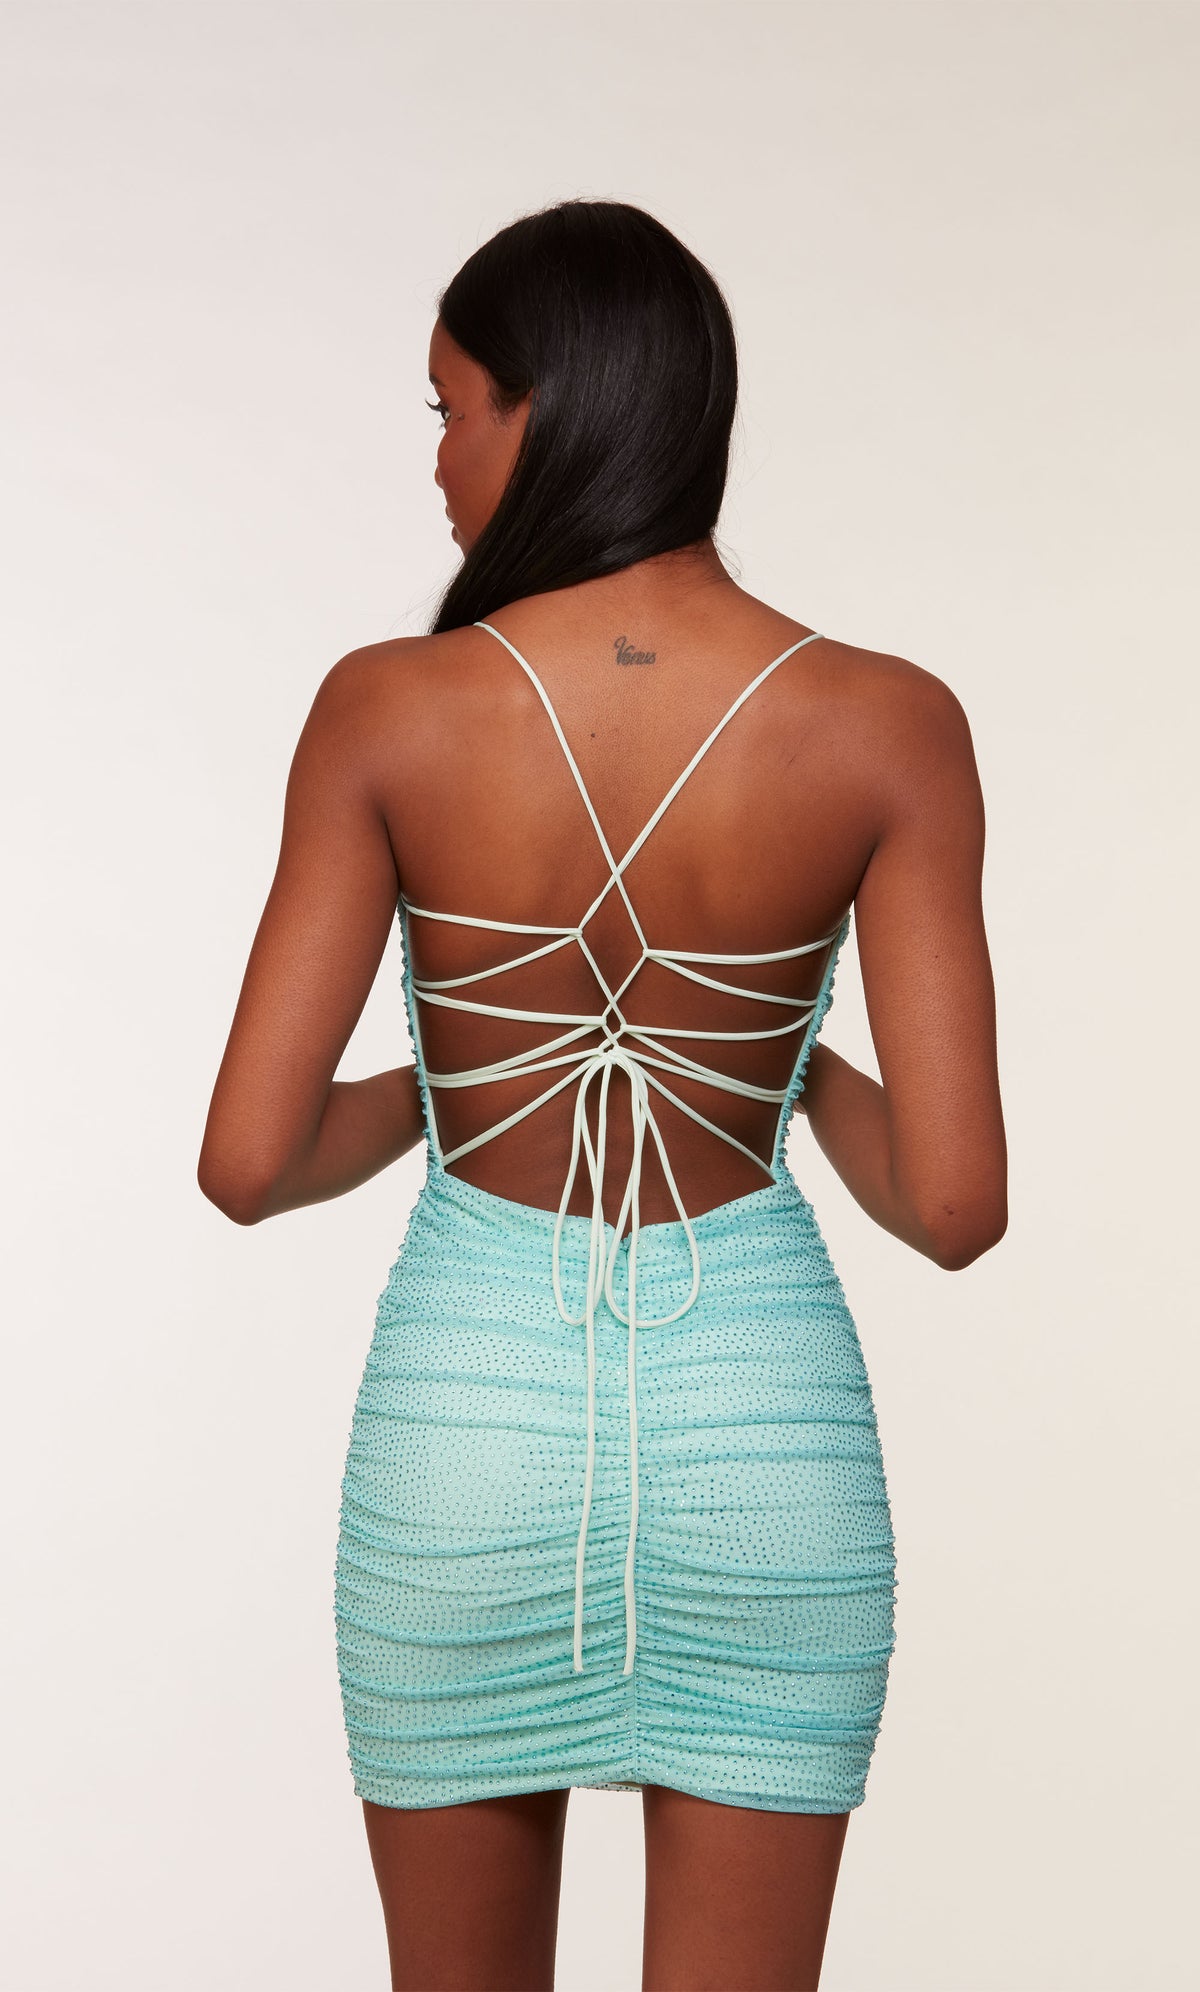 A mesh, light blue short formal dress with a strappy back, ruching detail, and heat-set stone embellishment throughout.